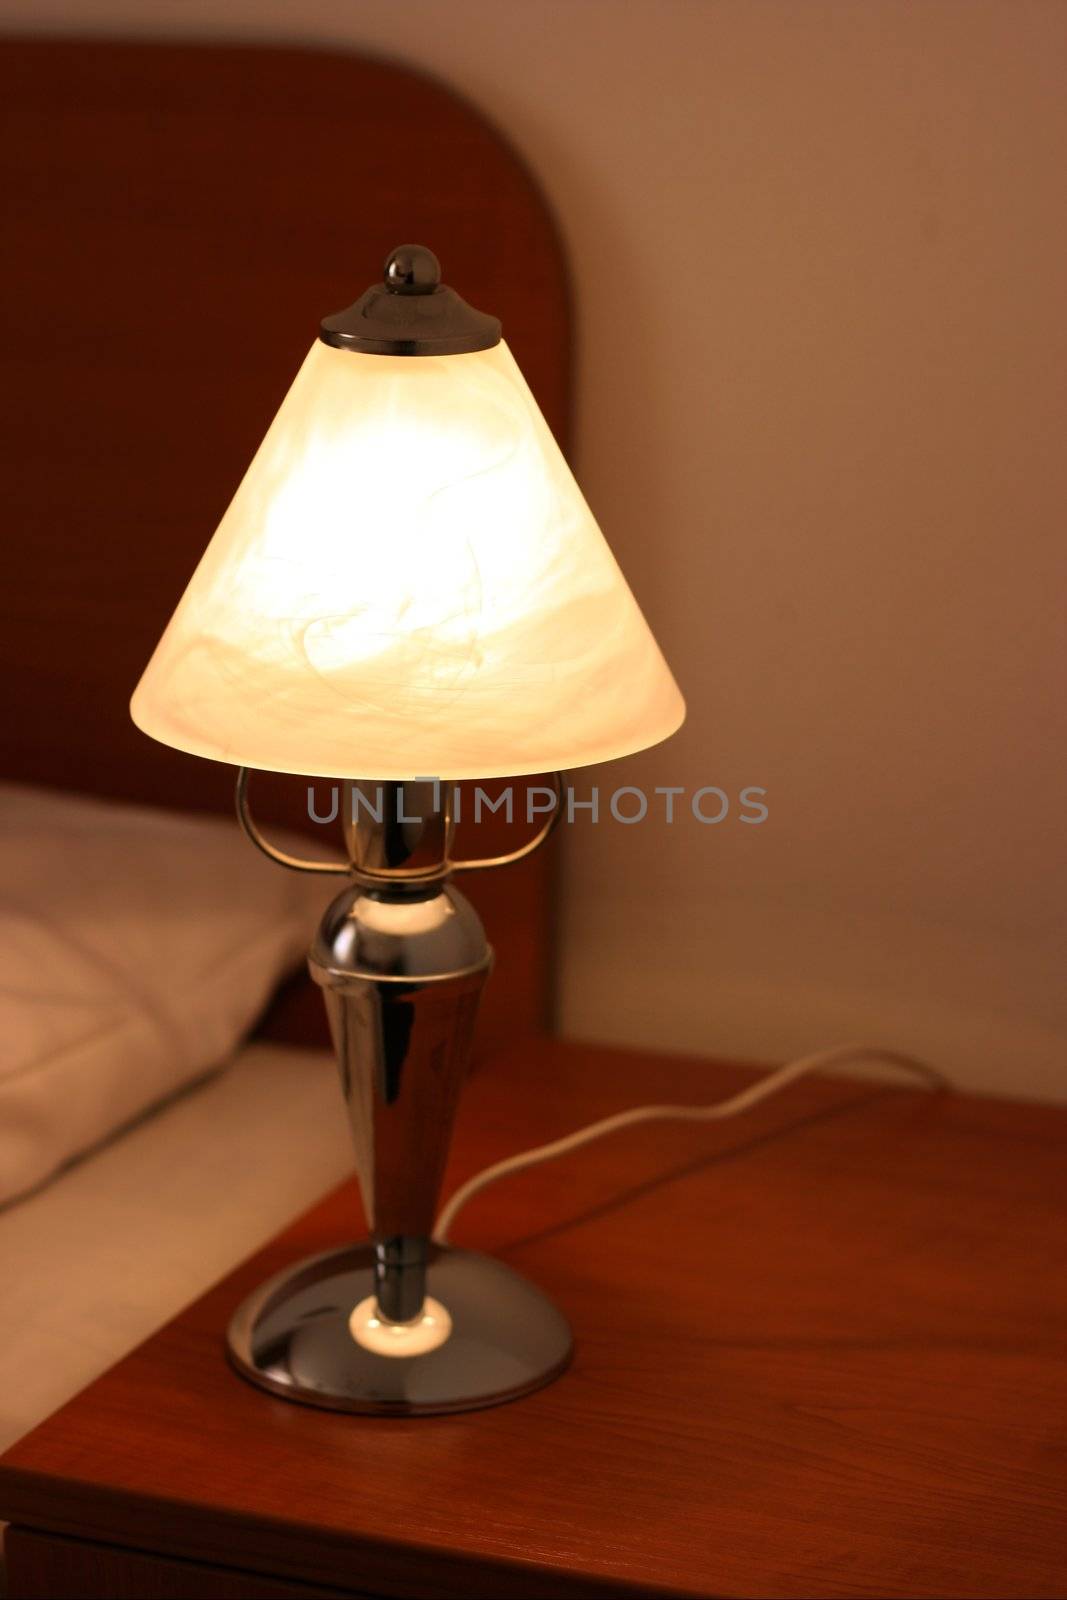 Lamp in the evening in a hotel room